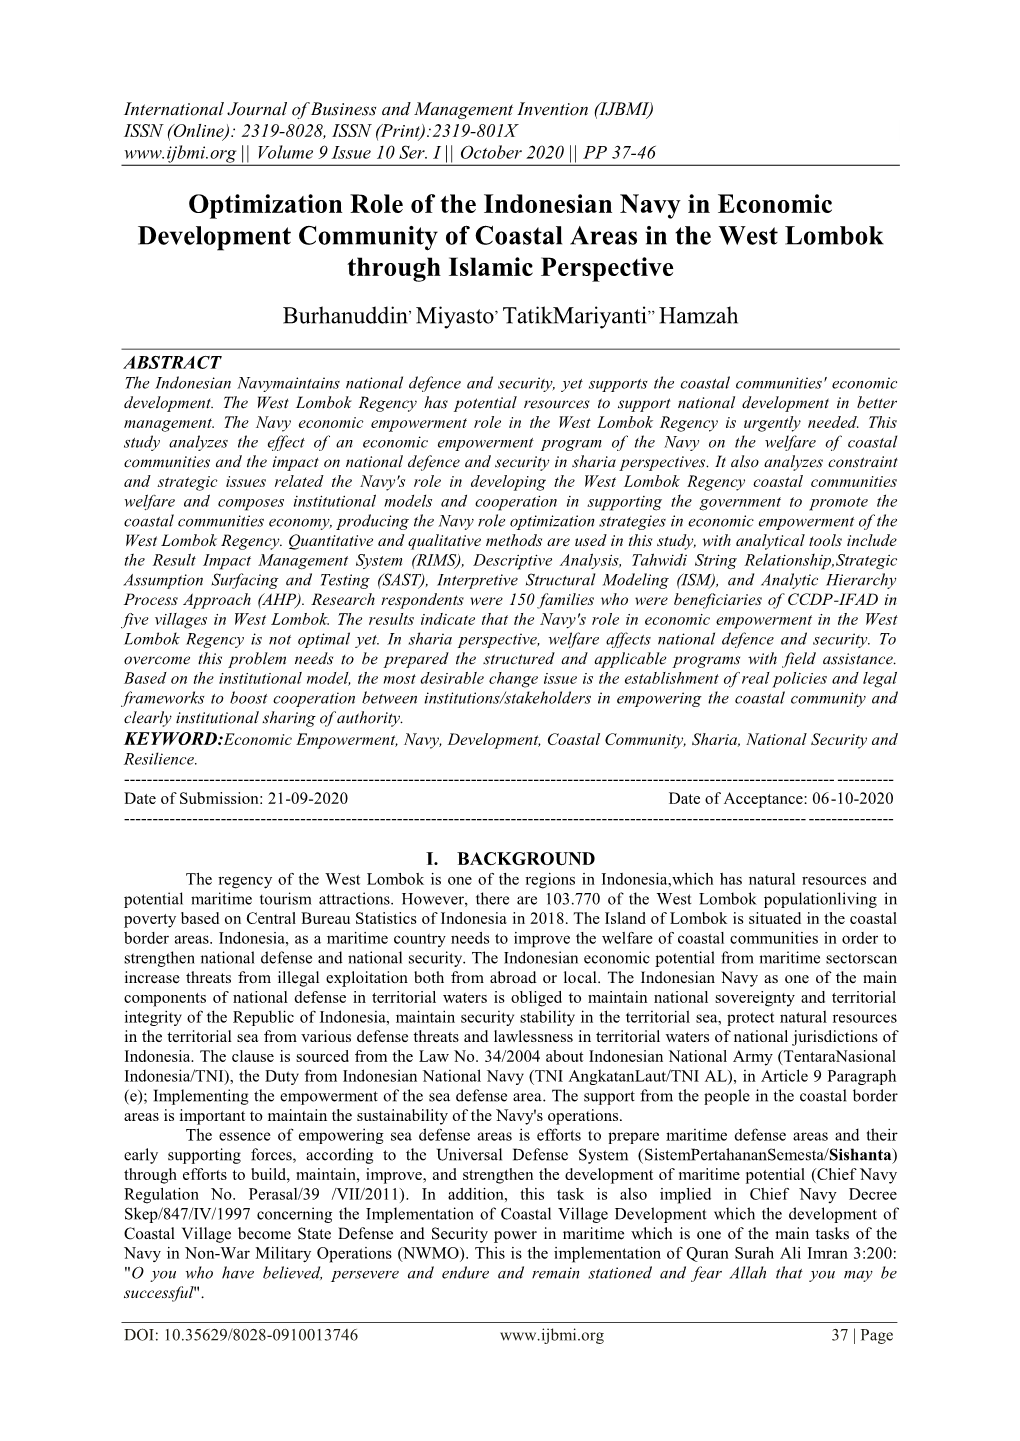 Optimization Role of the Indonesian Navy in Economic Development Community of Coastal Areas in the West Lombok Through Islamic Perspective